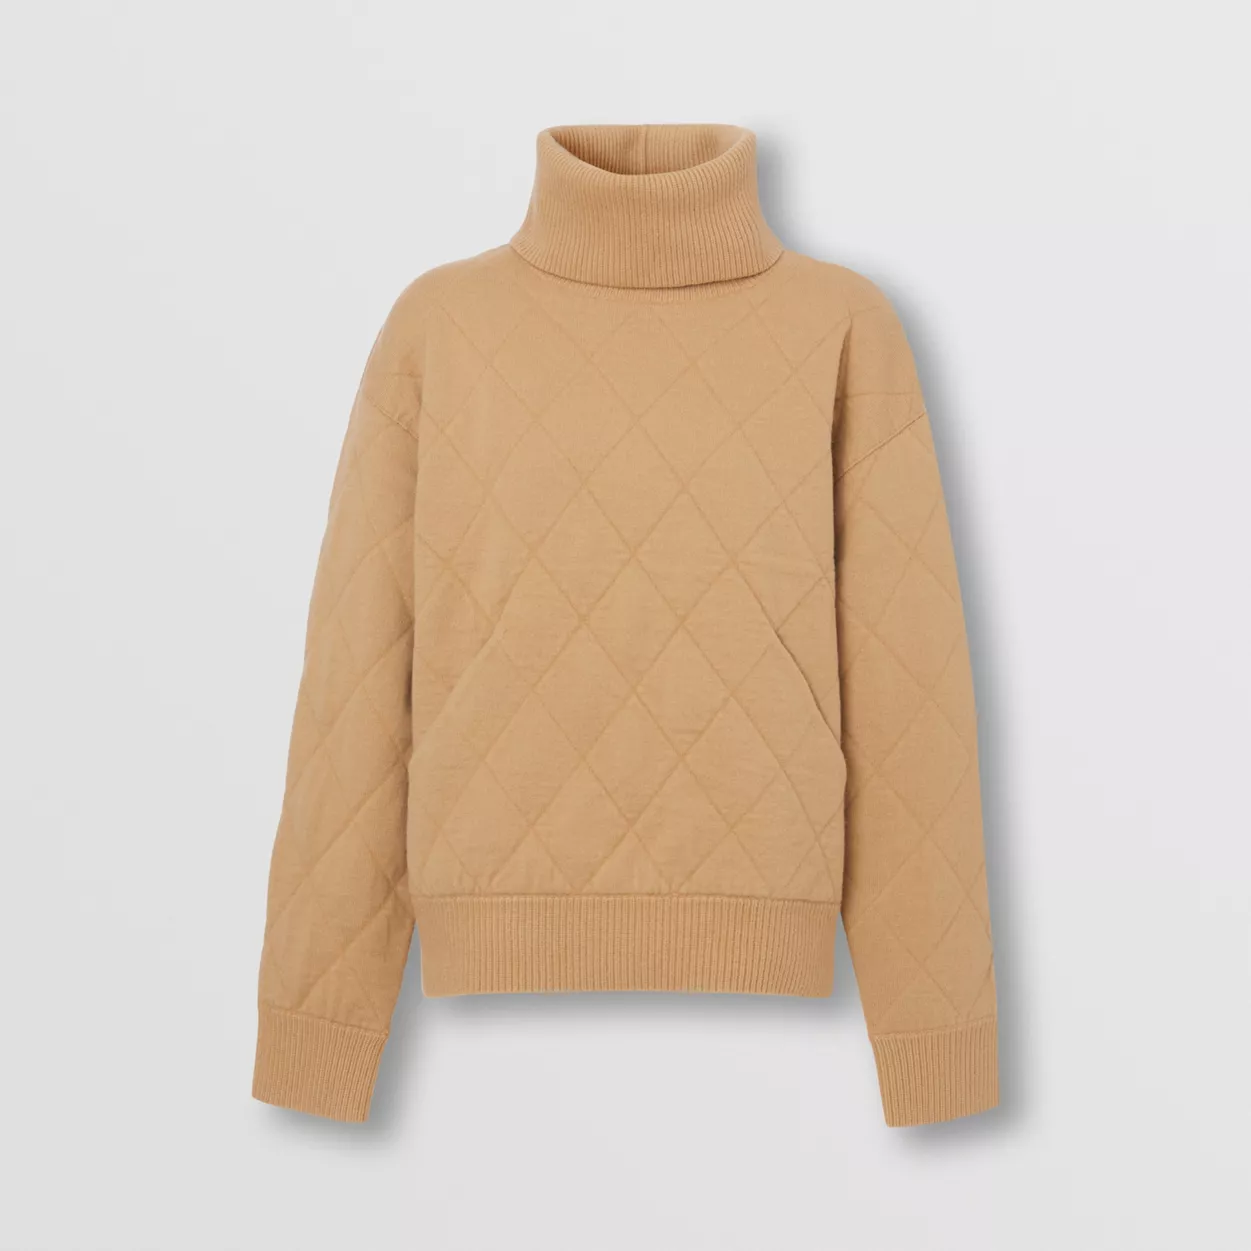 BURBERRY Diamond Quilted Wool Roll-neck Sweater £820 